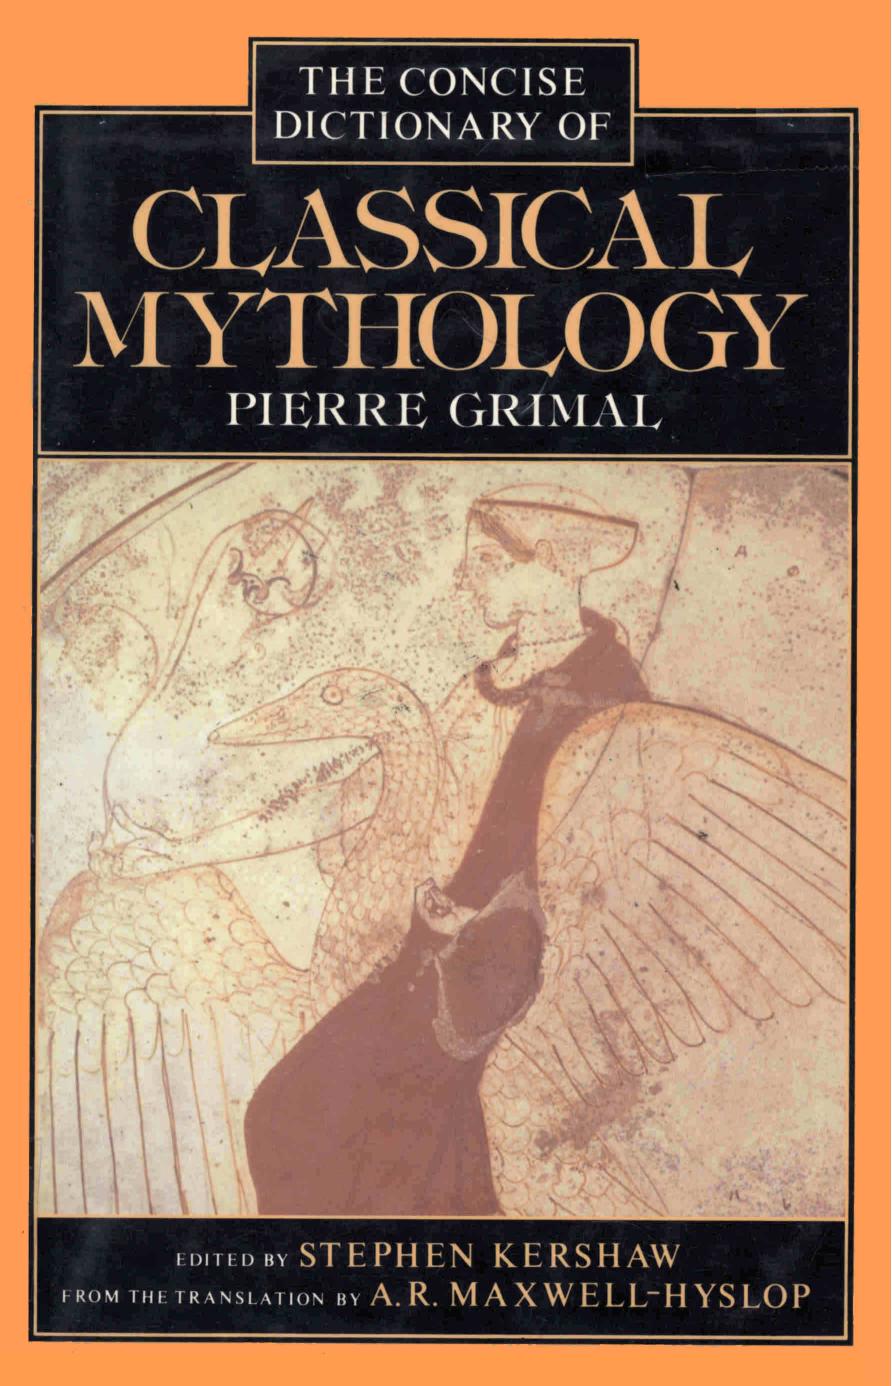 A Concise Dictionary of Classical Mythology